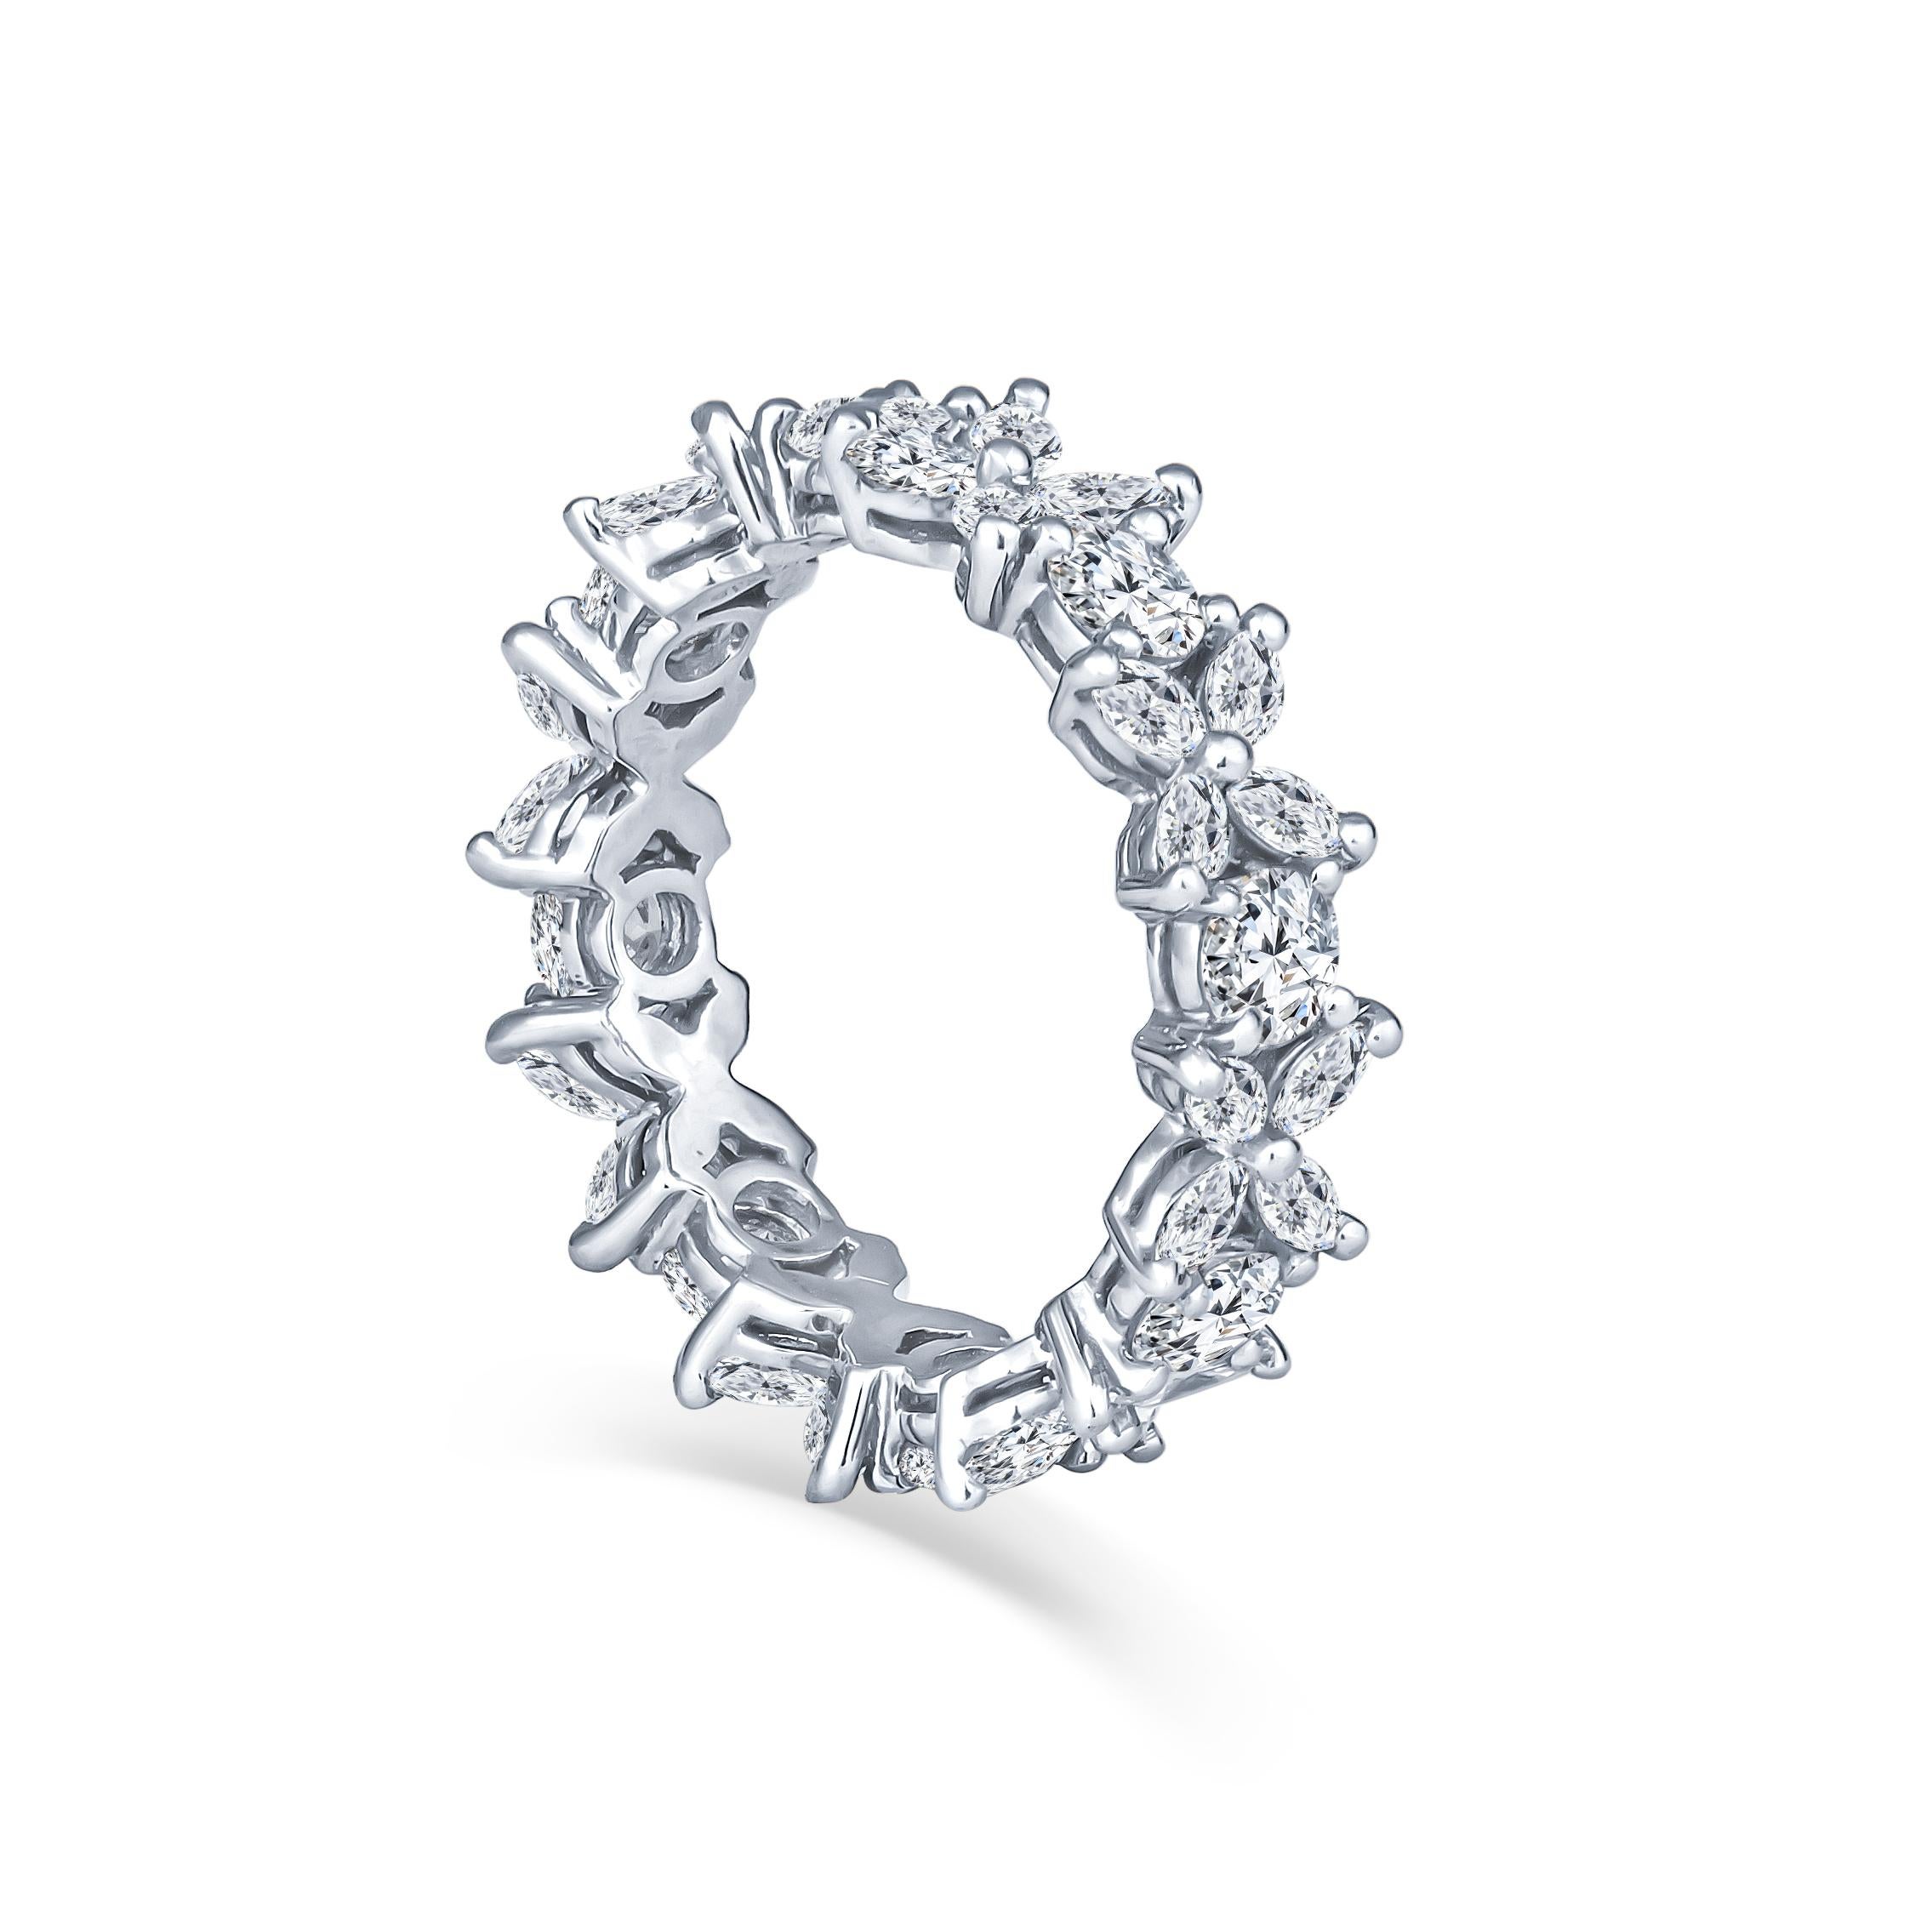 This beautiful floral Tiffany & Co. eternity band from the Victoria collection has a 1.93ct total weight in fine quality round and marquise cut diamonds, set in platinum. The MSRP is $15,200. The marquise cut diamonds make for a total carat weight